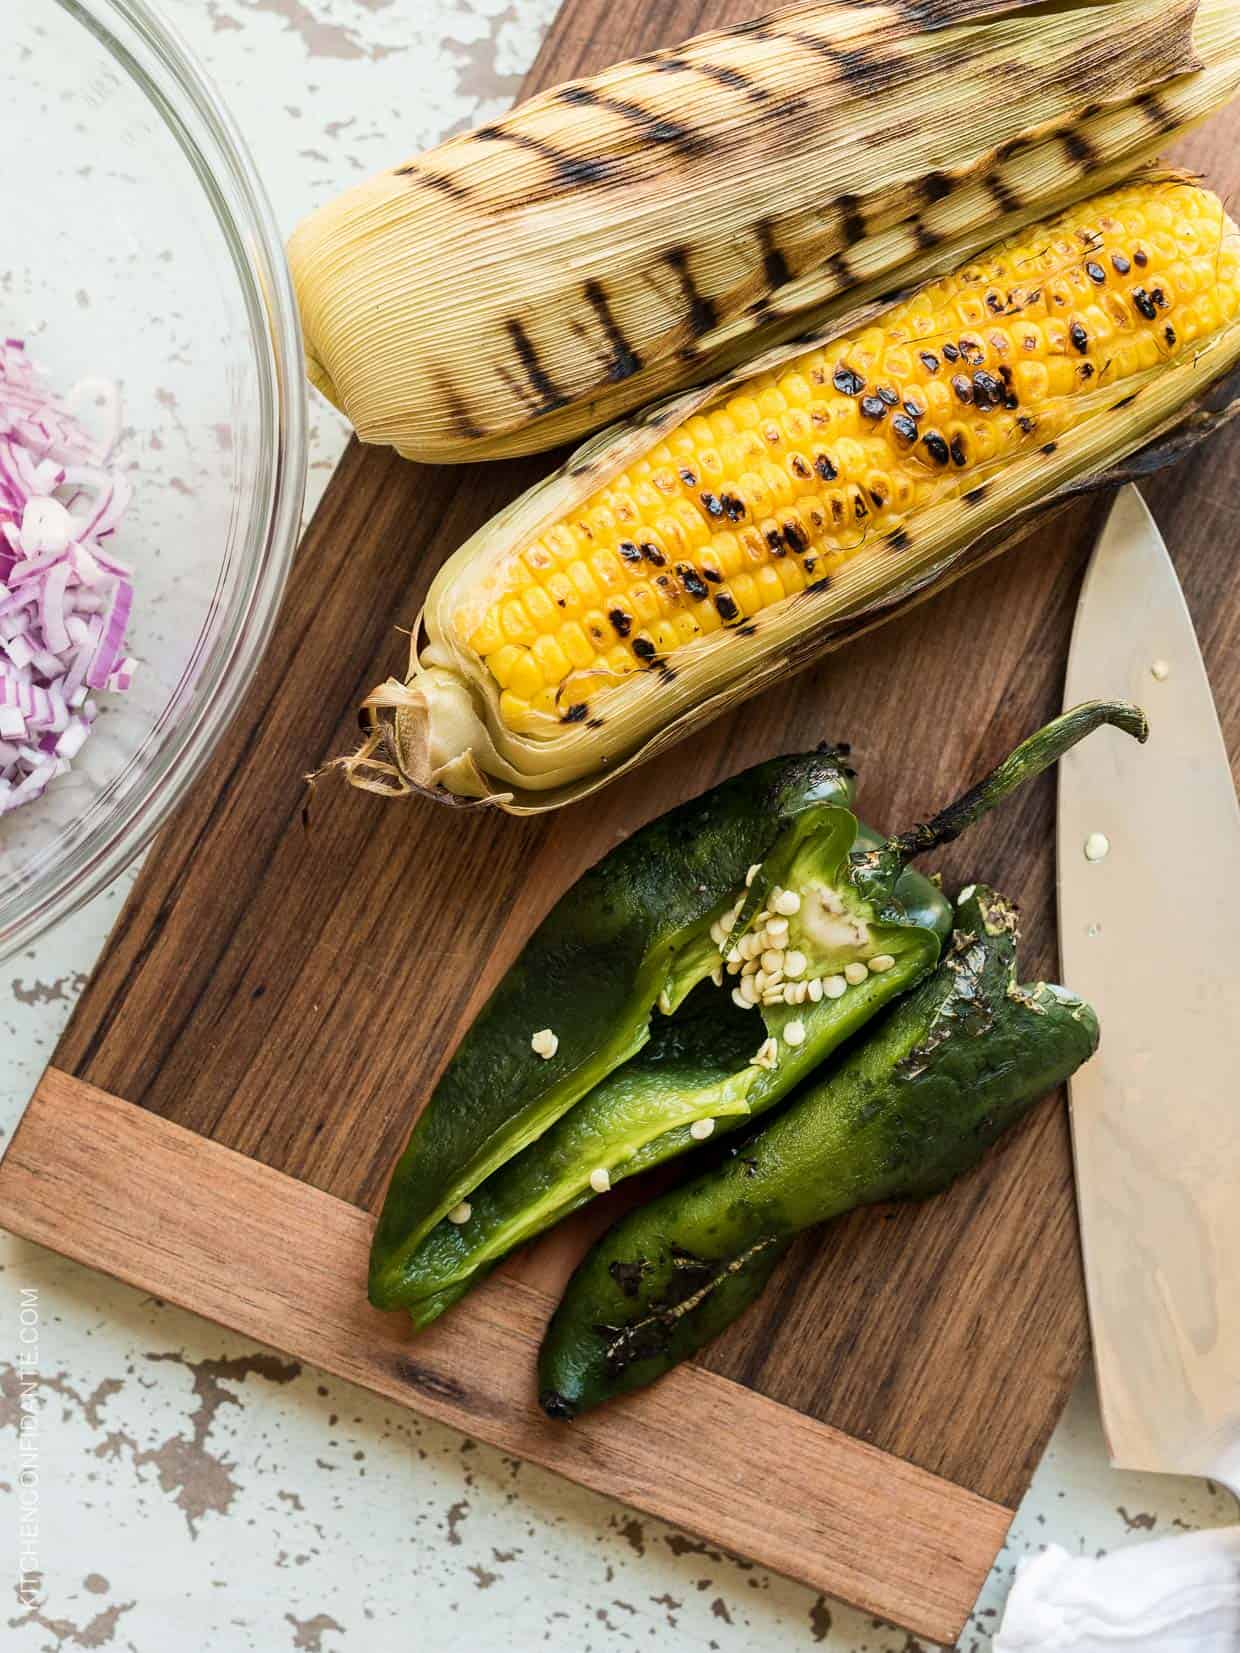 Freshly grilled corn and poblano pepper on a wooden cutting board.